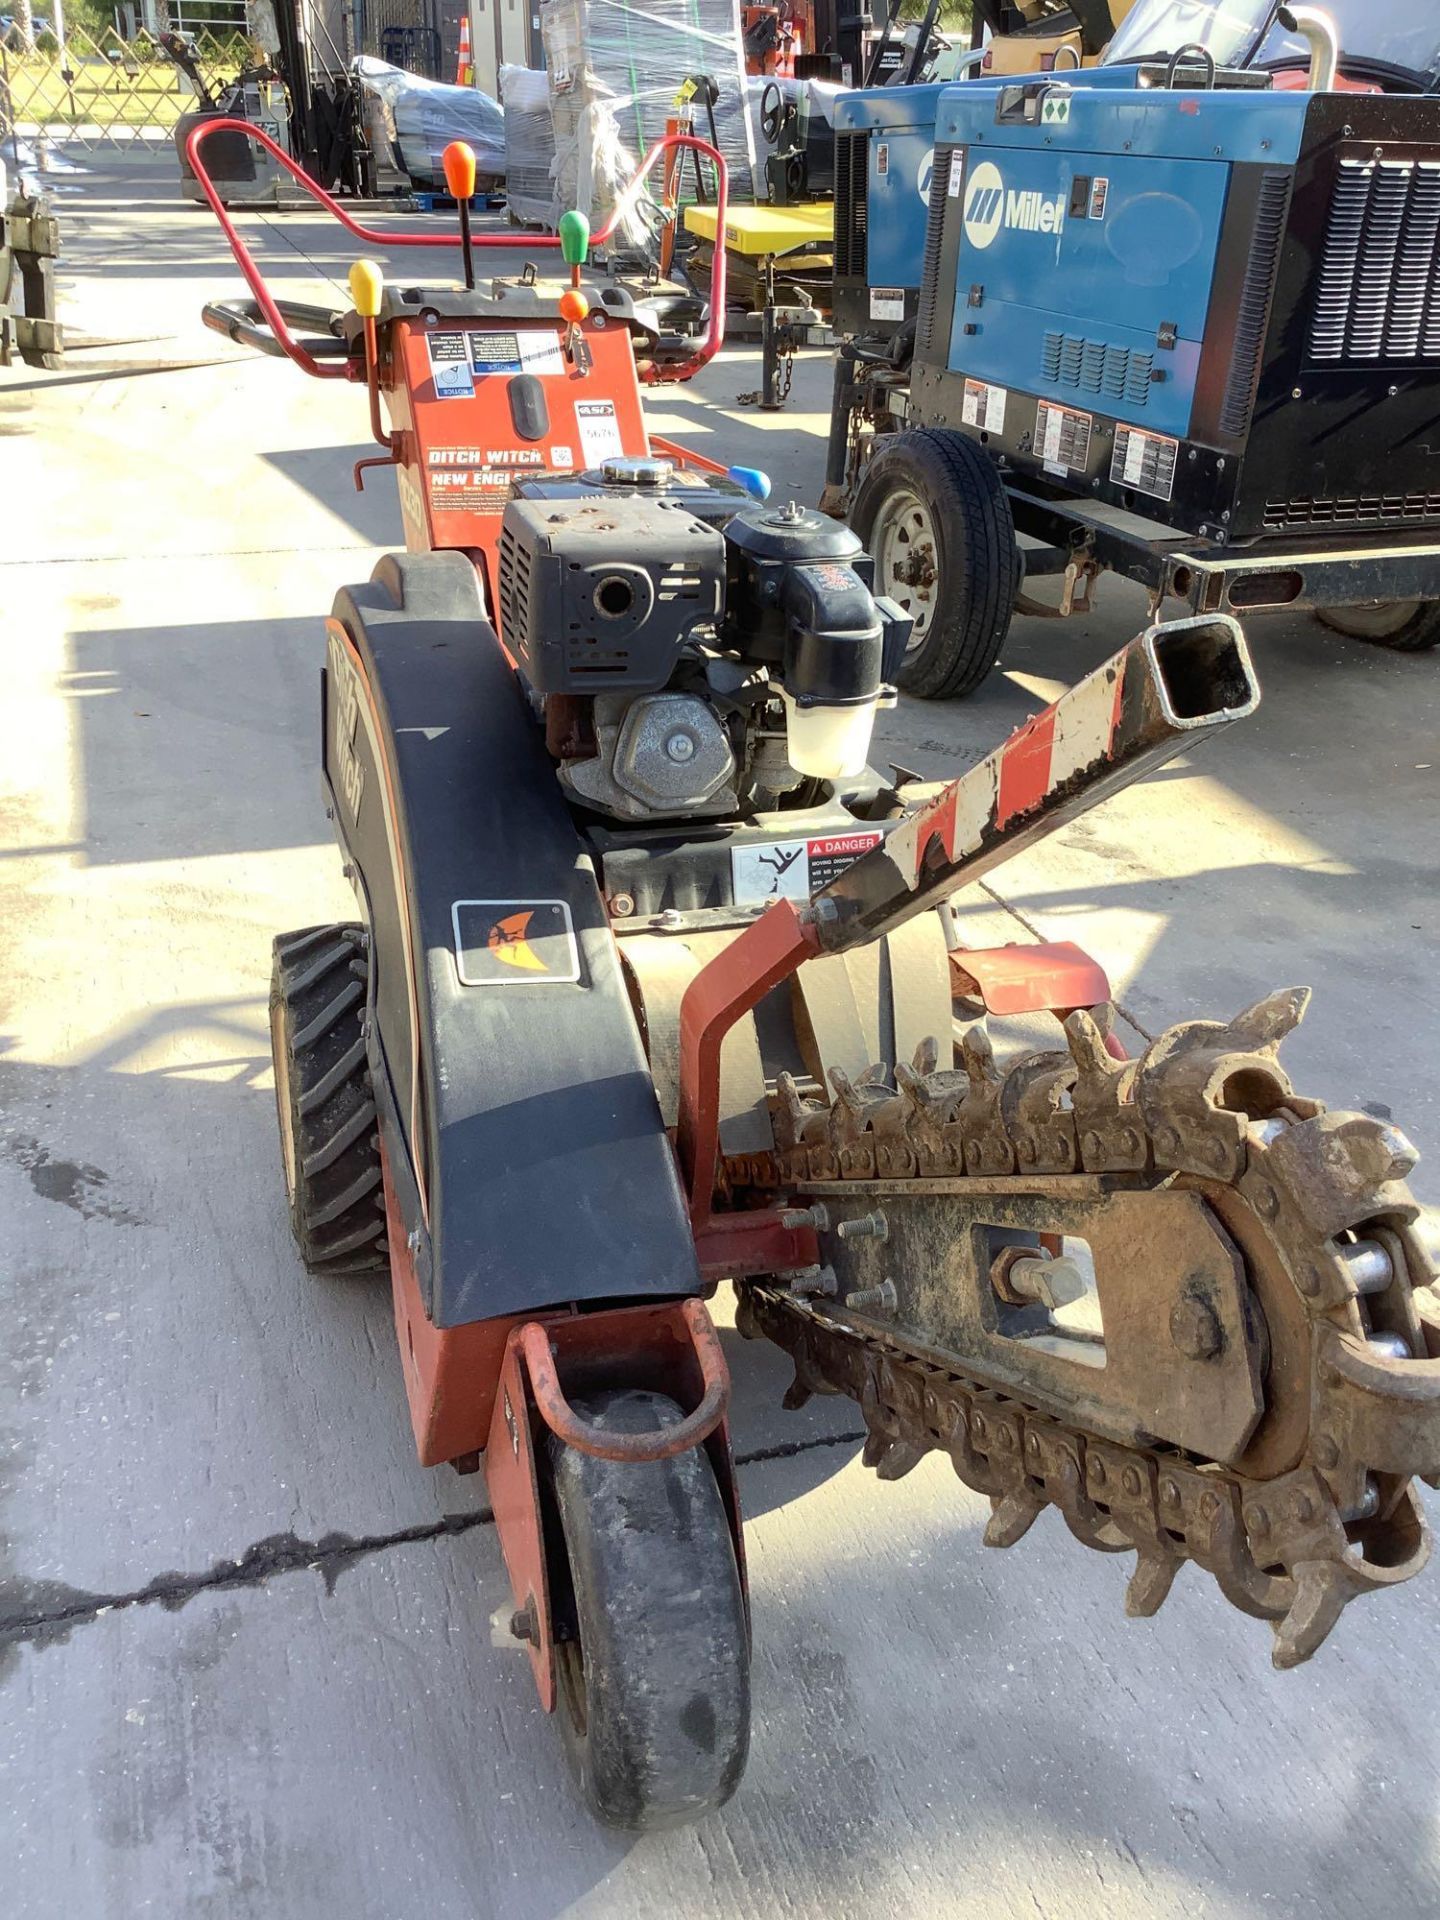 DITCH WITCH WALK BEHIND TRENCHER MODEL 1030, GAS POWERED, RUNS & OPERATES - Image 5 of 11